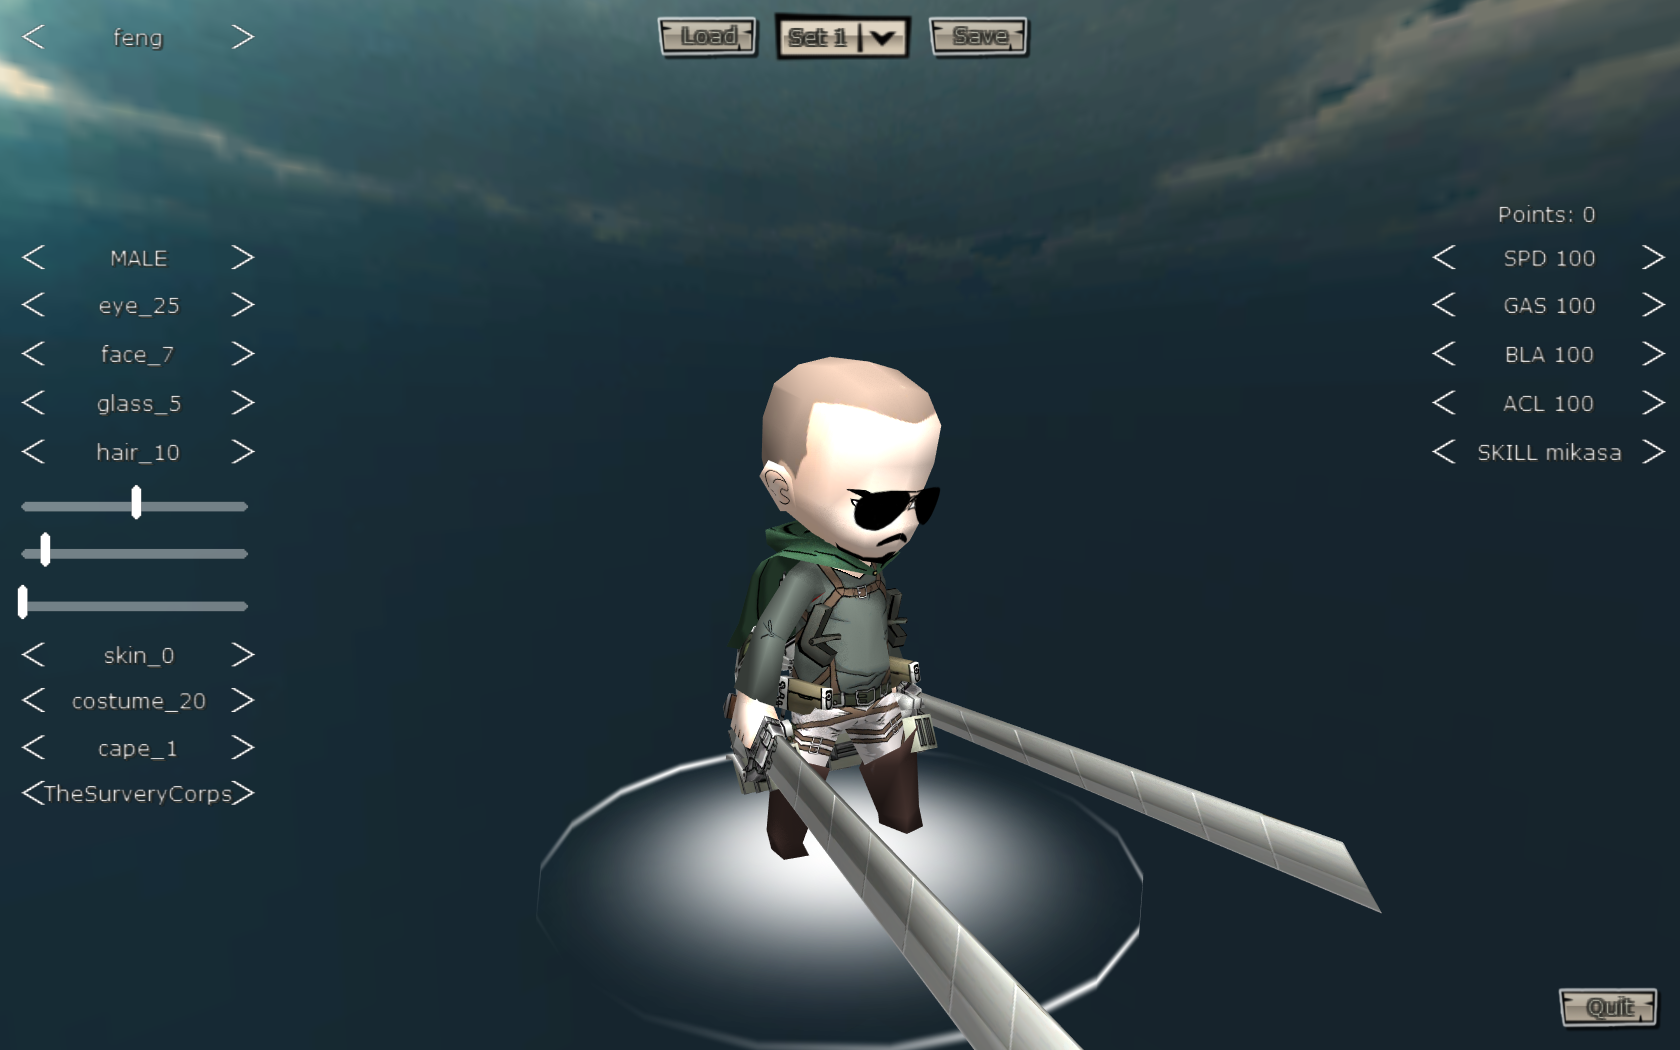 Attack On Titan Tribute Game (Web Browser)